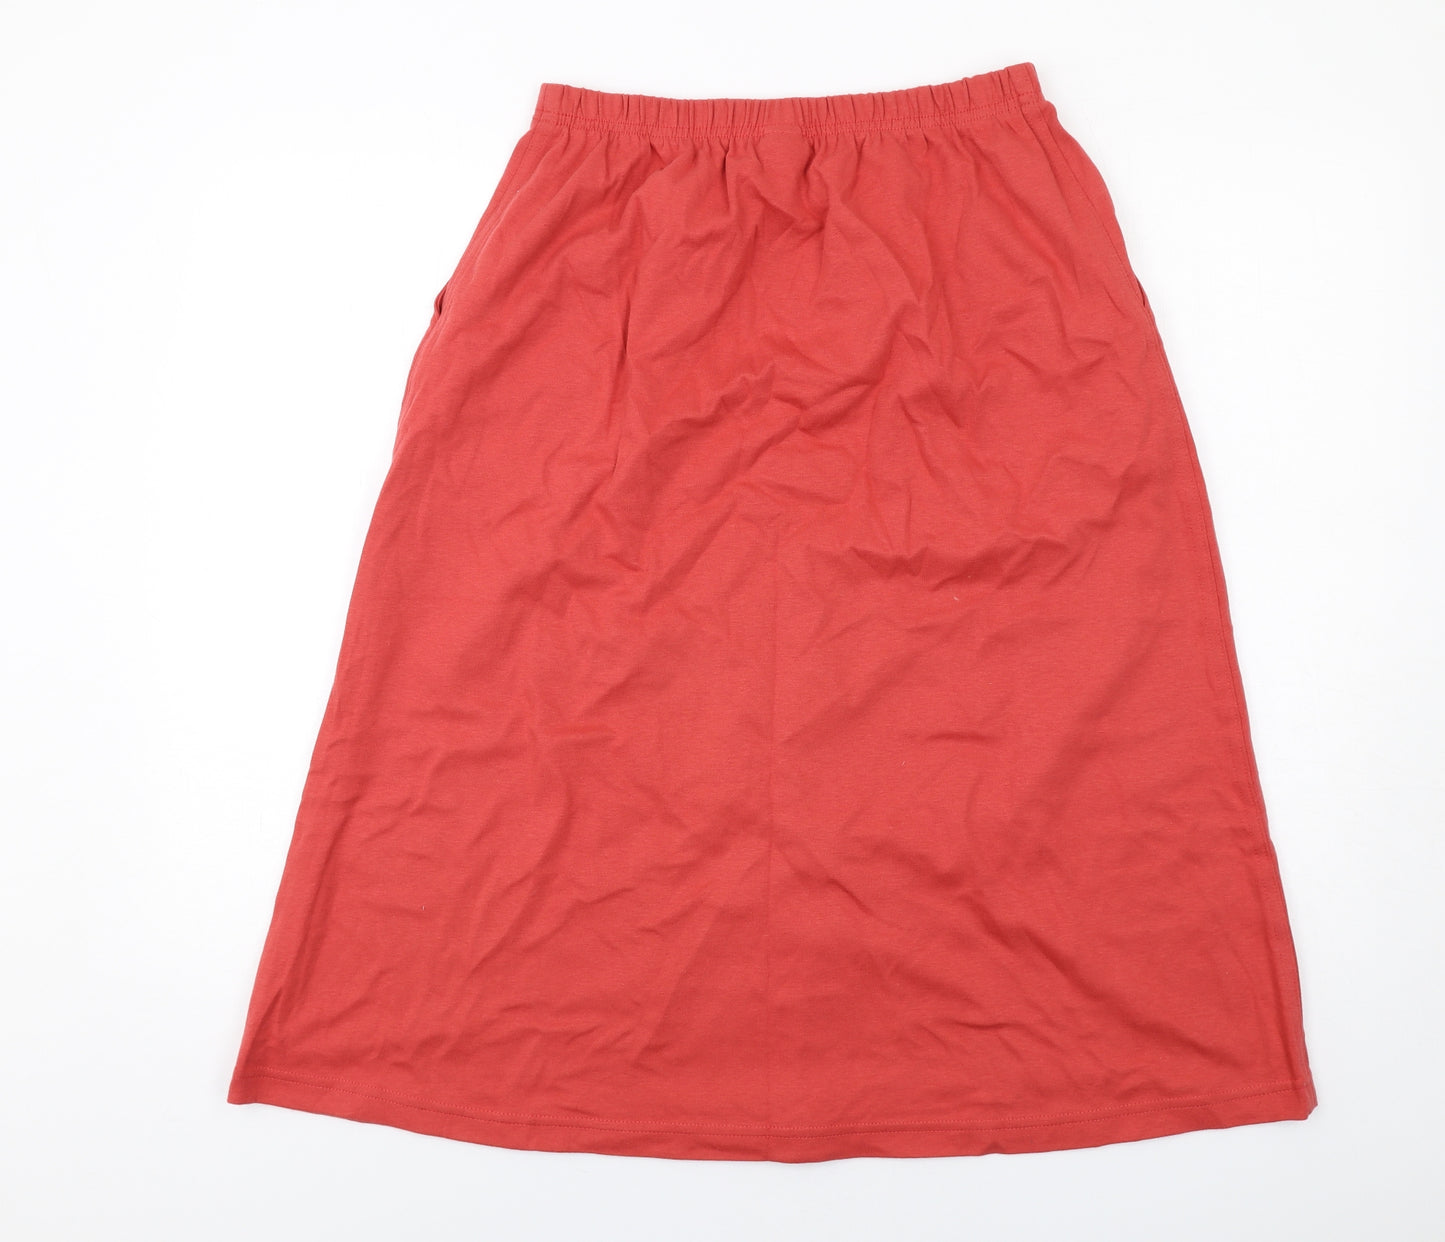 Lands' End Womens Red Cotton A-Line Skirt Size 10